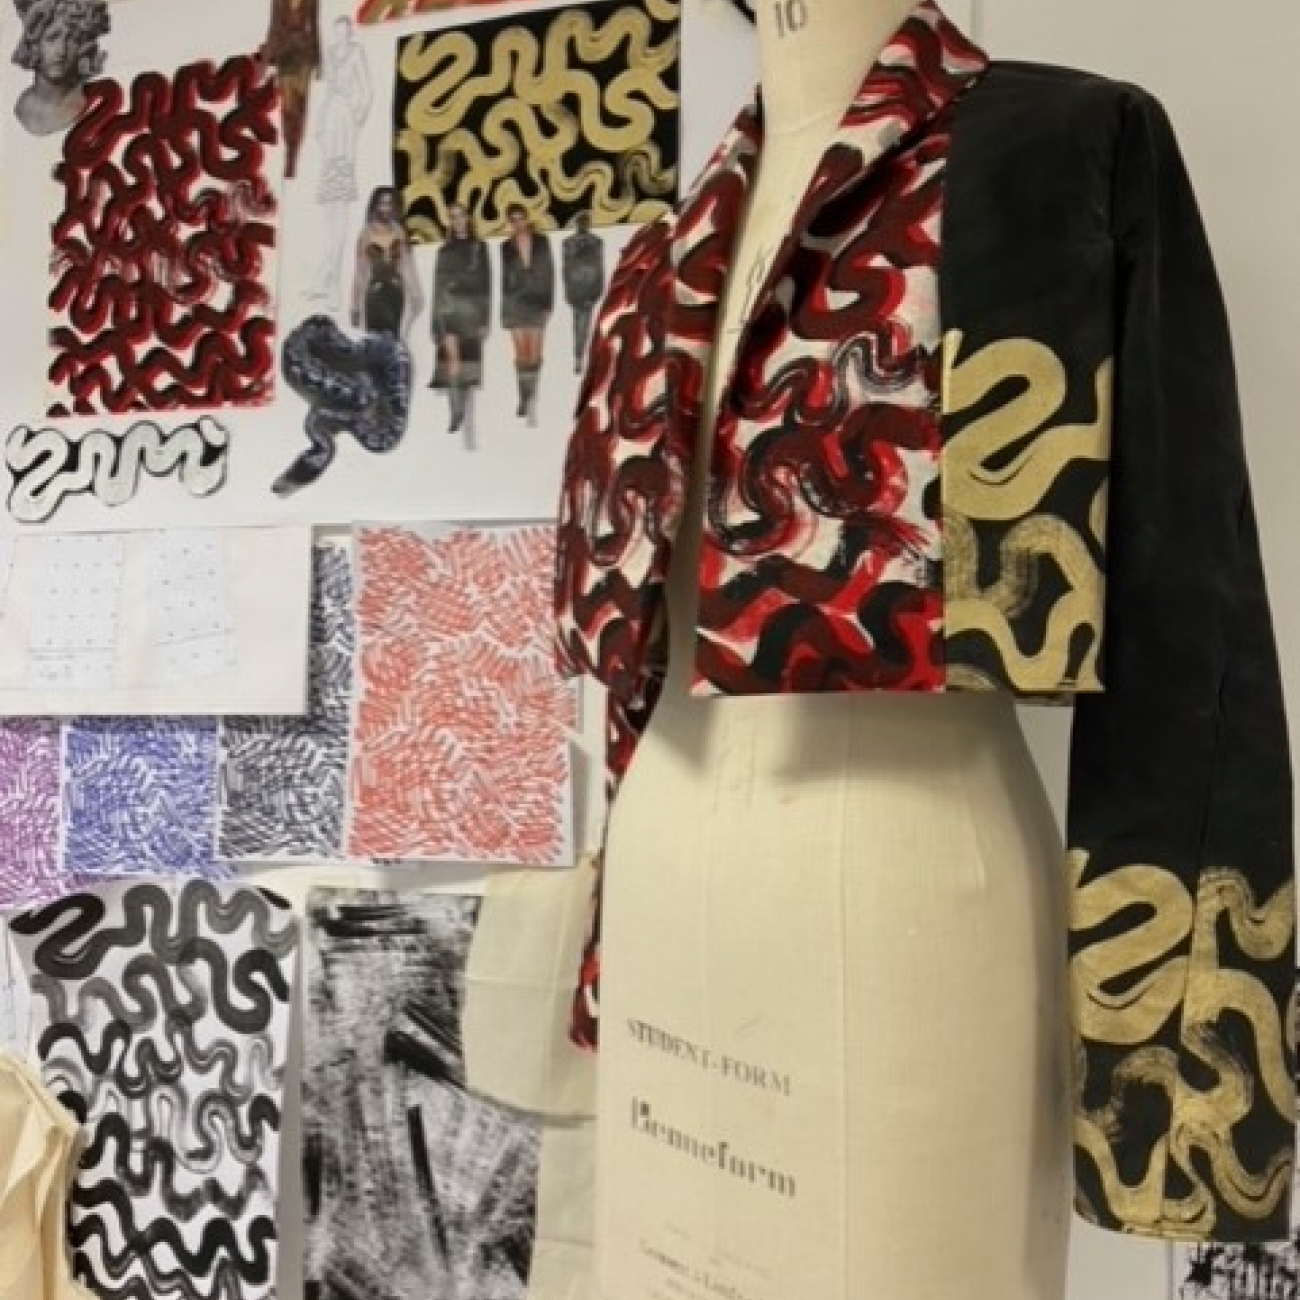 Fashion students create contemporary designs for the high street!